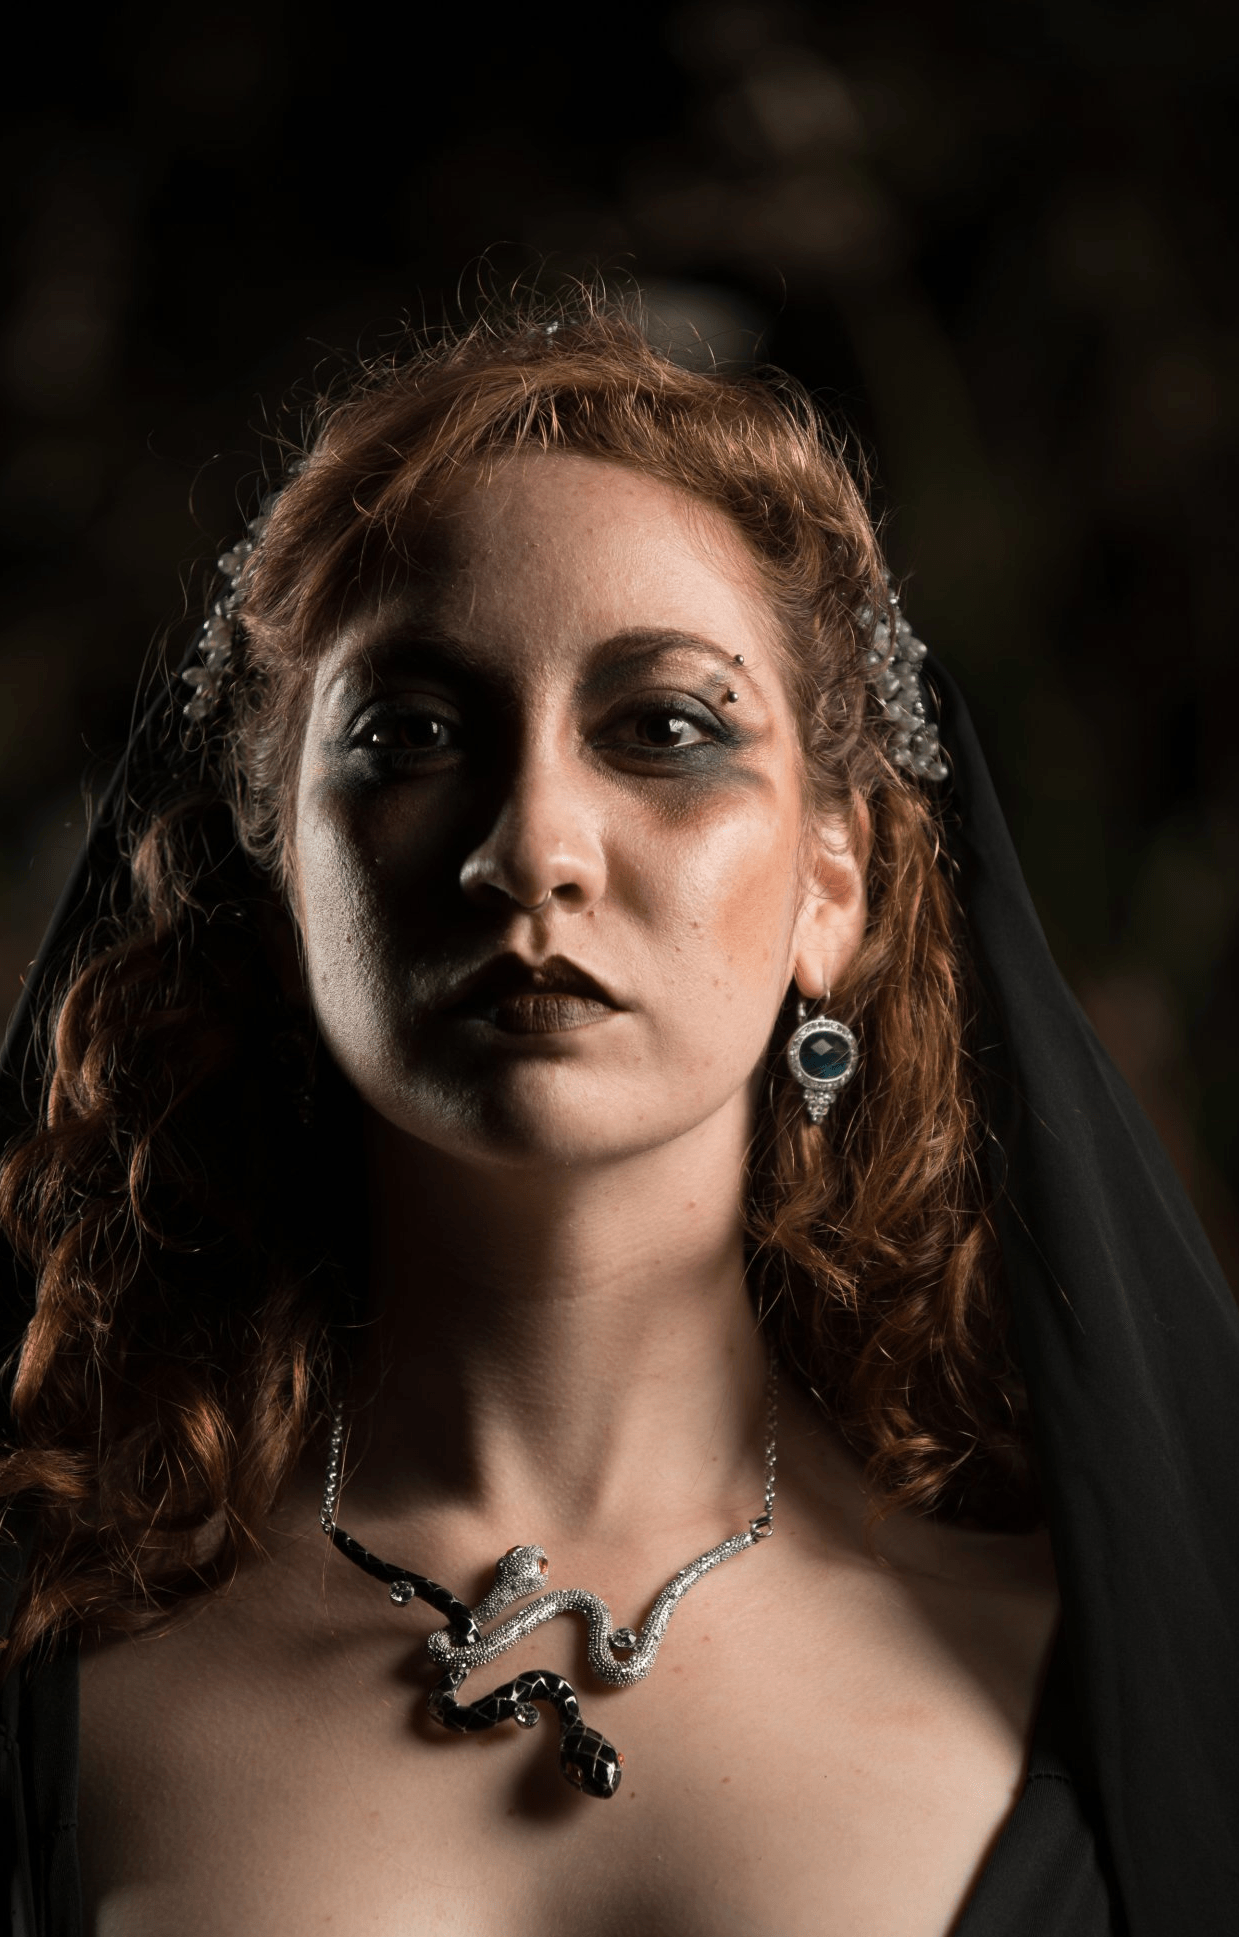 A woman wearing a black veil and a necklace is looking at the camera, representing Hekate.